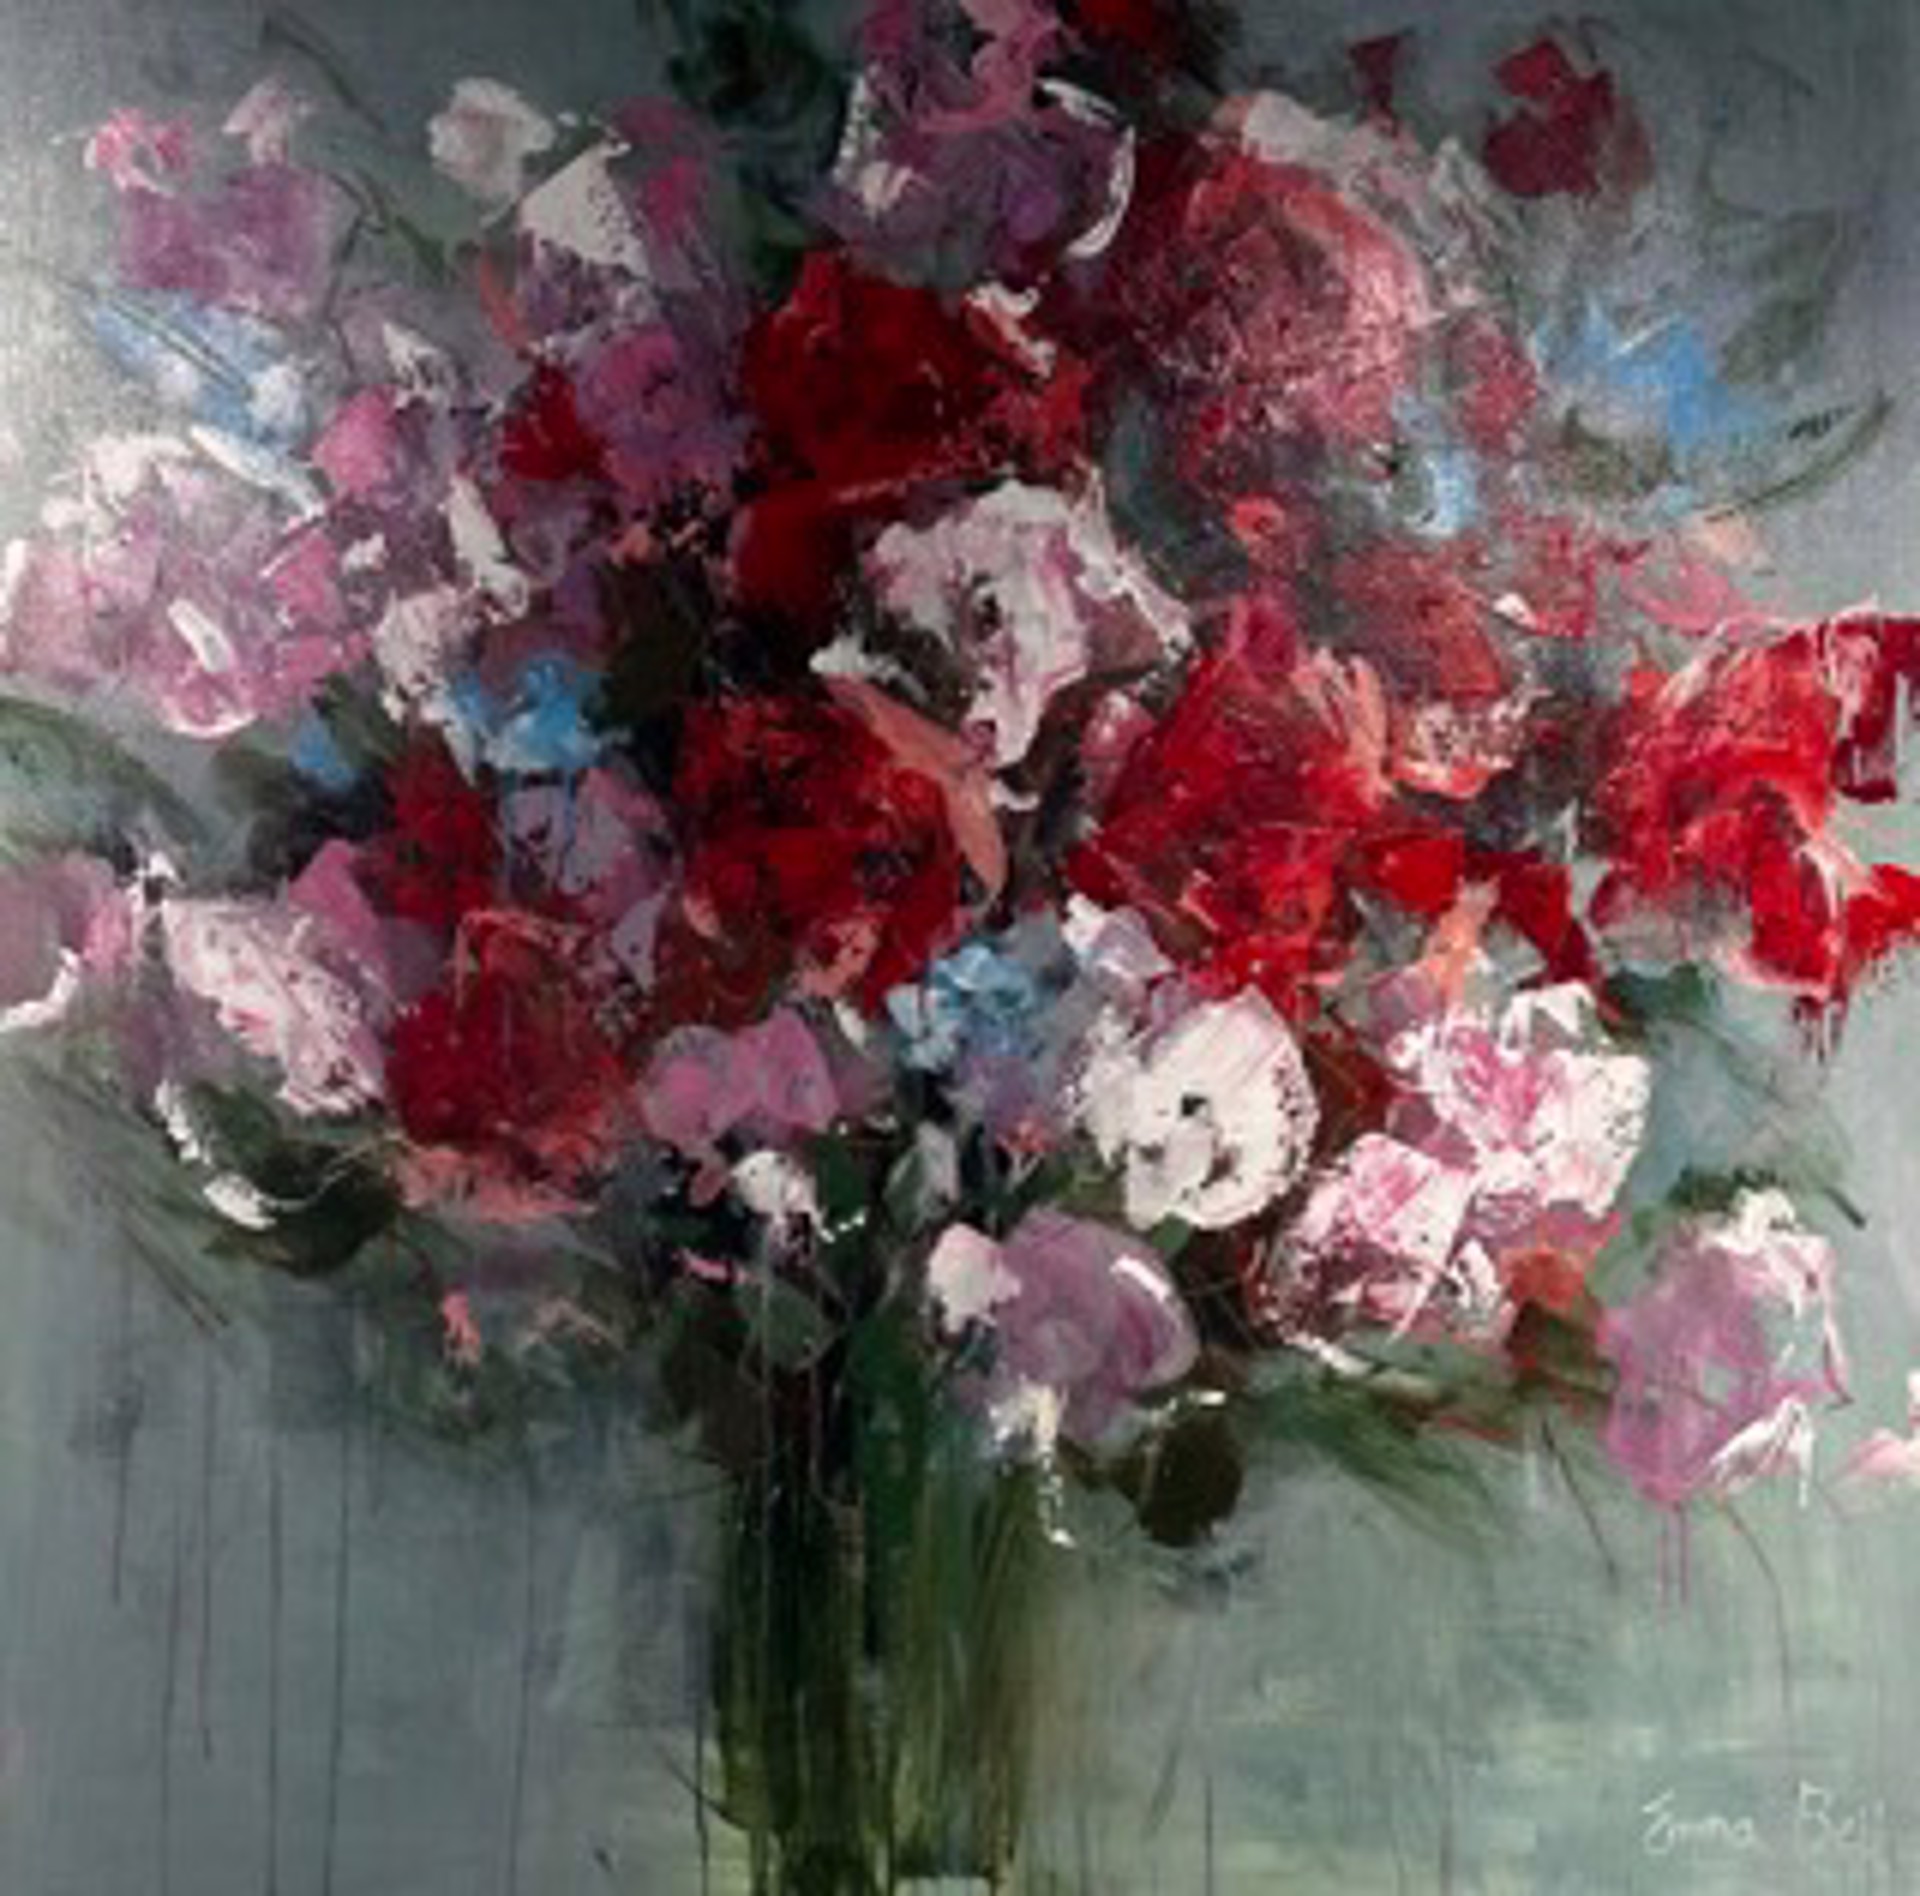 Red Flowers by Emma Bell